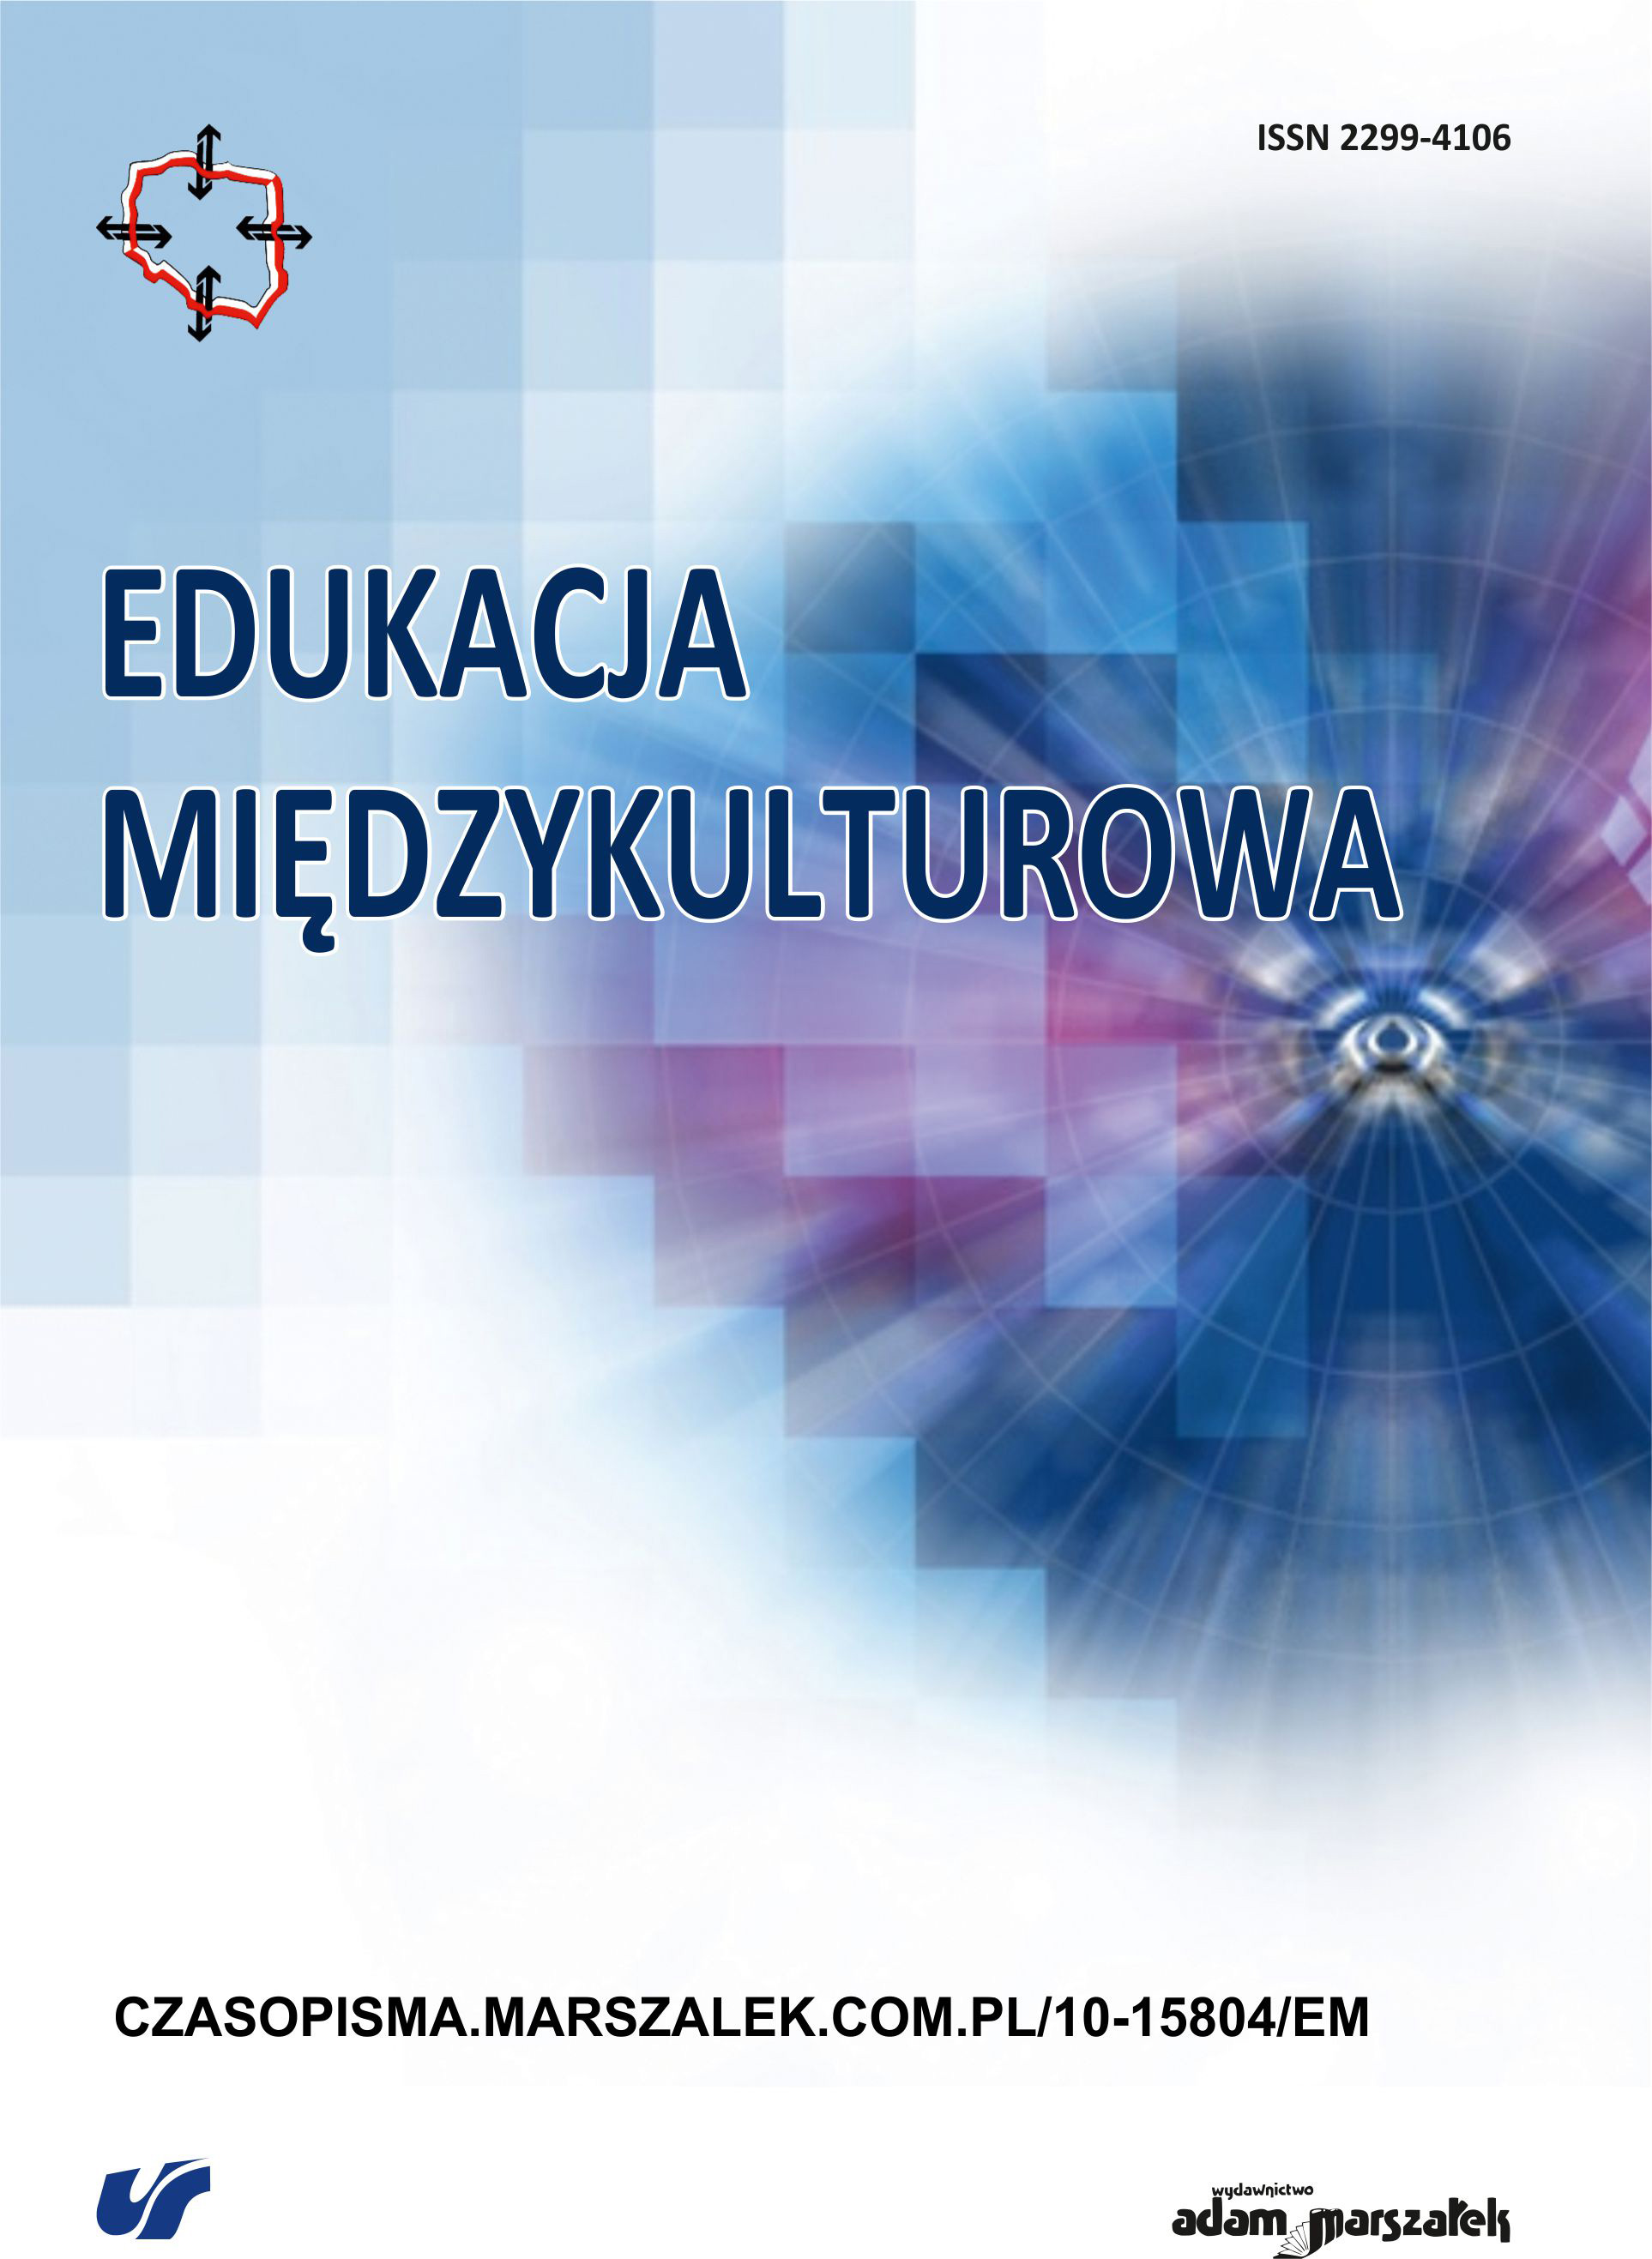 Towards axiological maturity – the implementation and fulfilment of values by academic youth from Poland, the Czech Republic, Slovakia and Ukraine